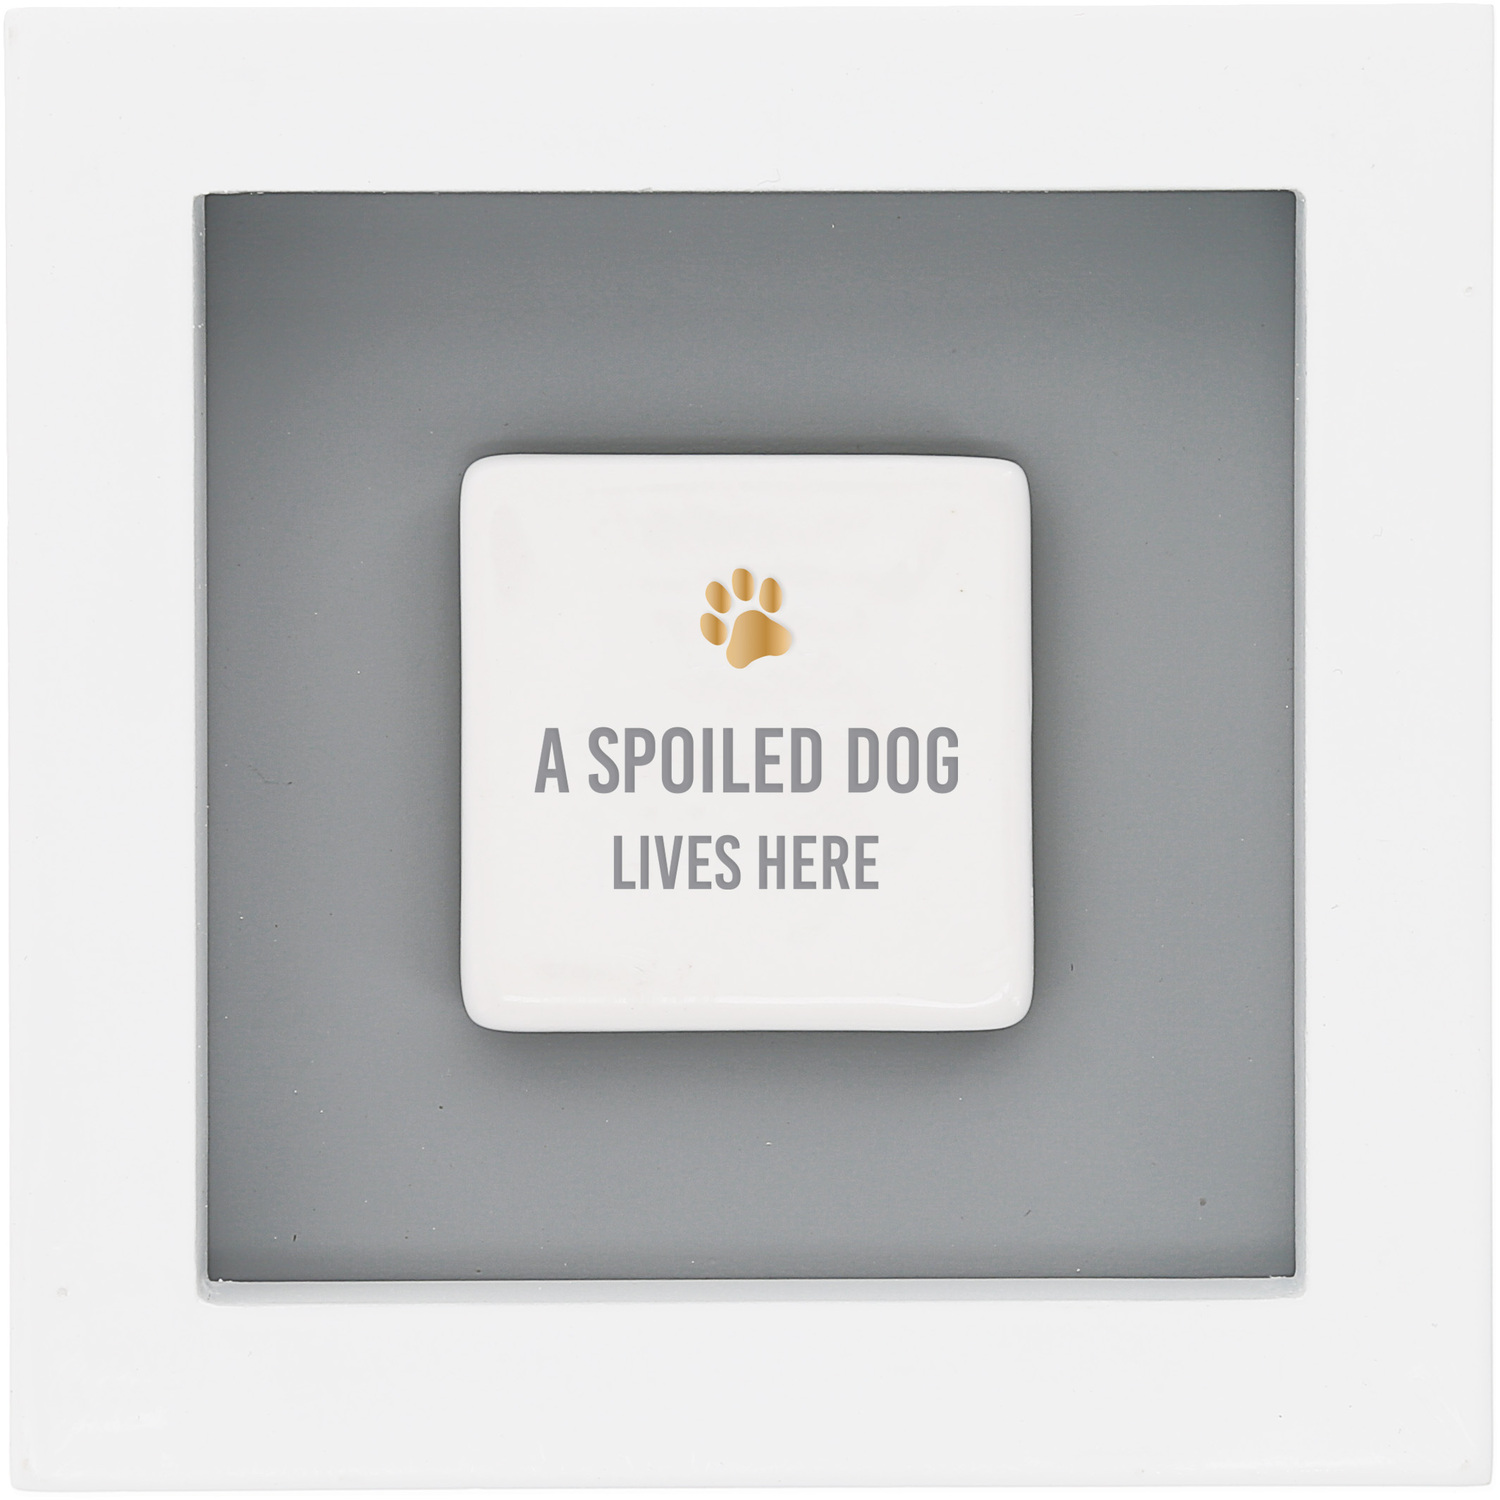 A Spoiled Dog by Said with Love - A Spoiled Dog - 4.75" Plaque